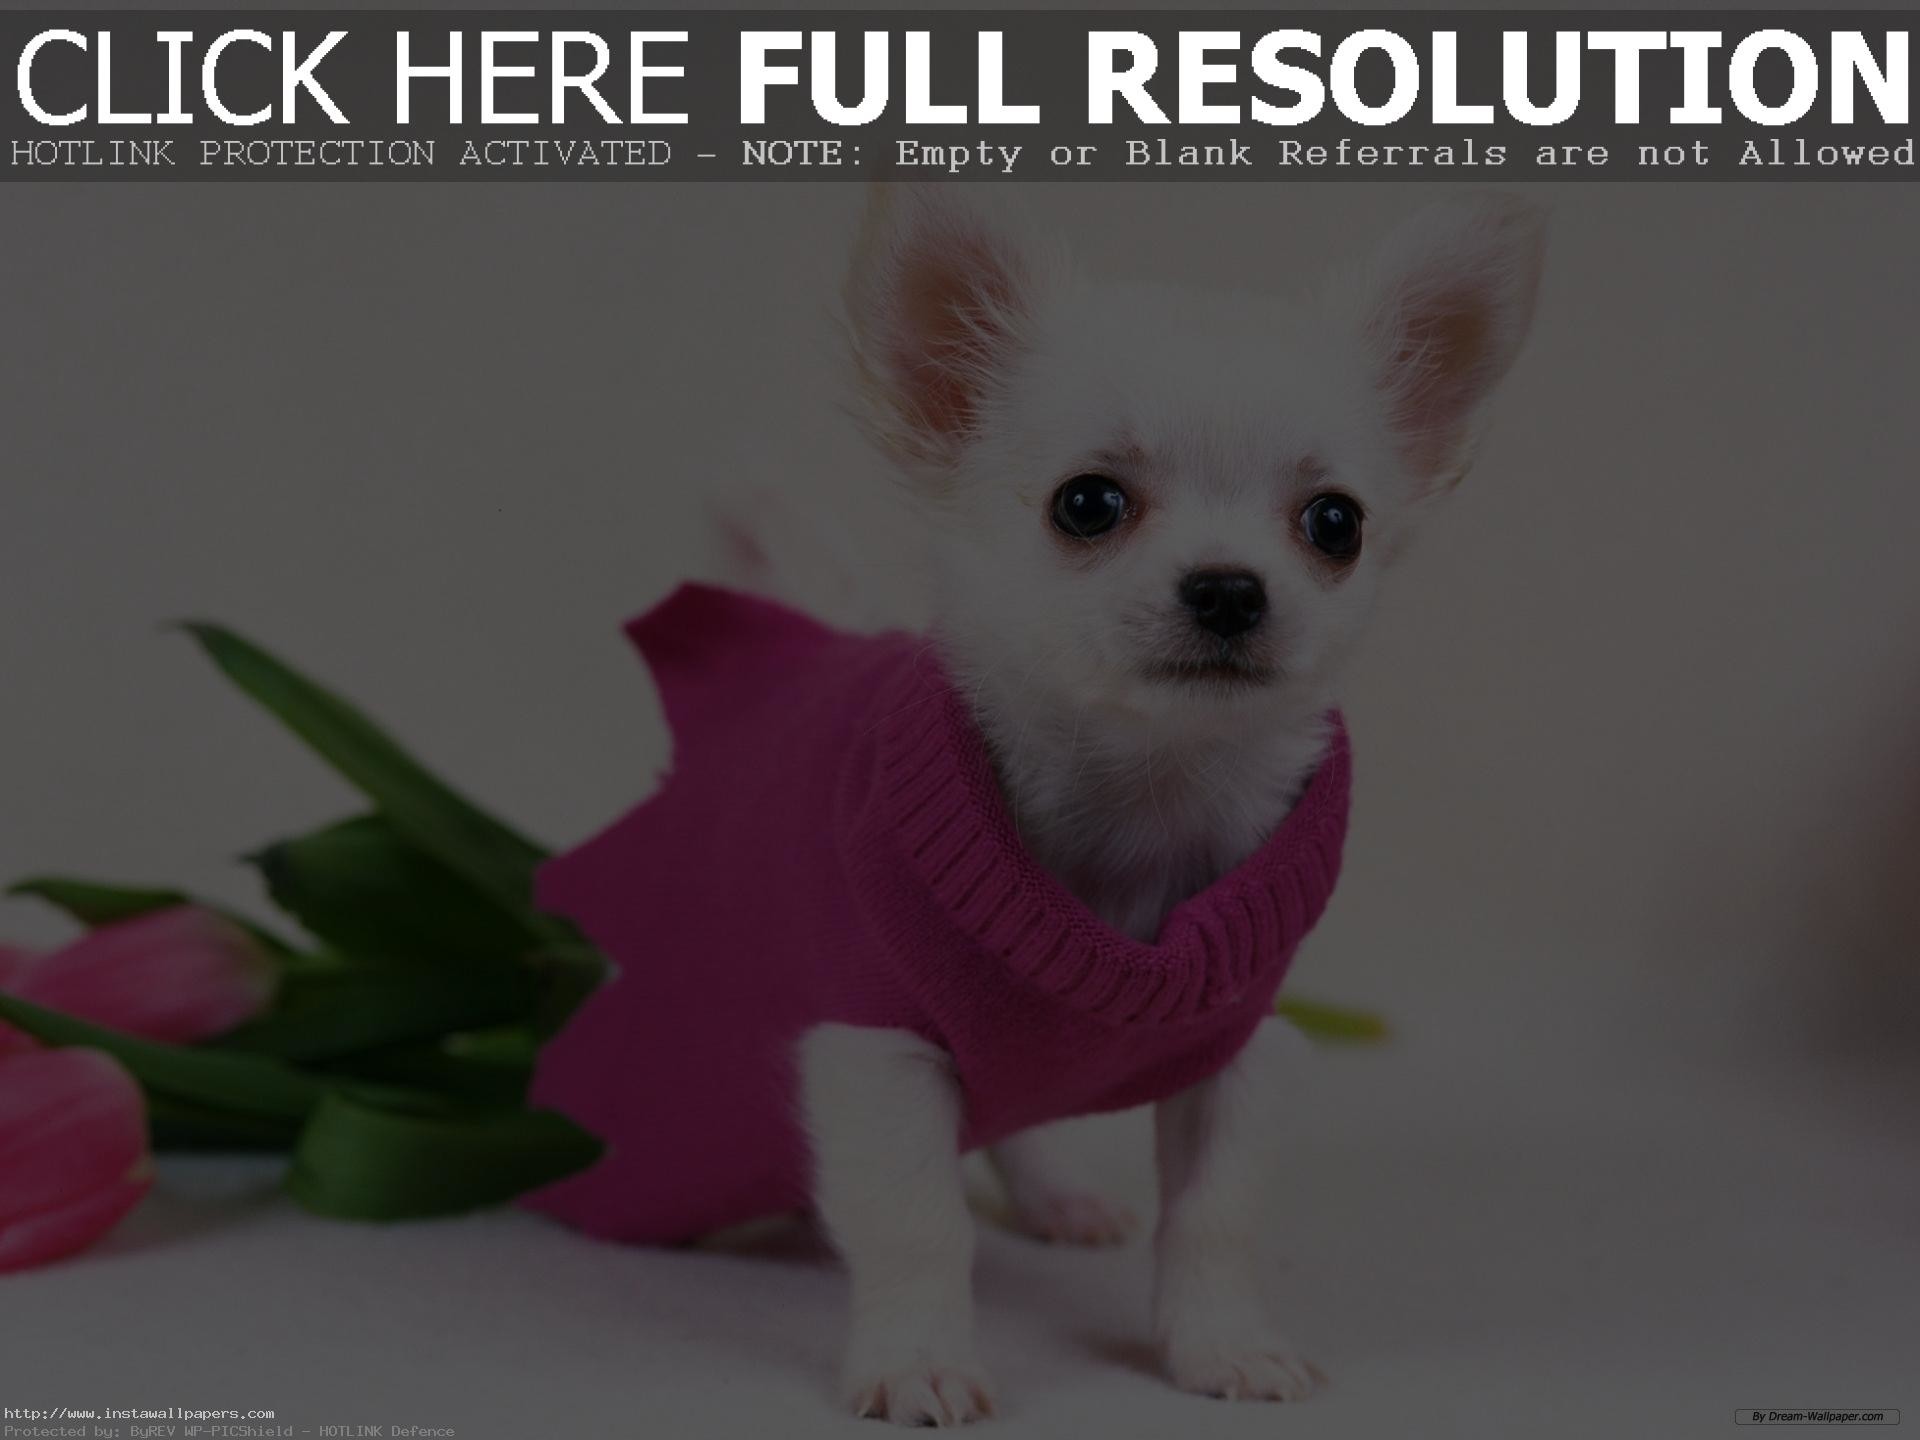 Free chihuahua puppy wallpaper for desktop HD PC Laptop background